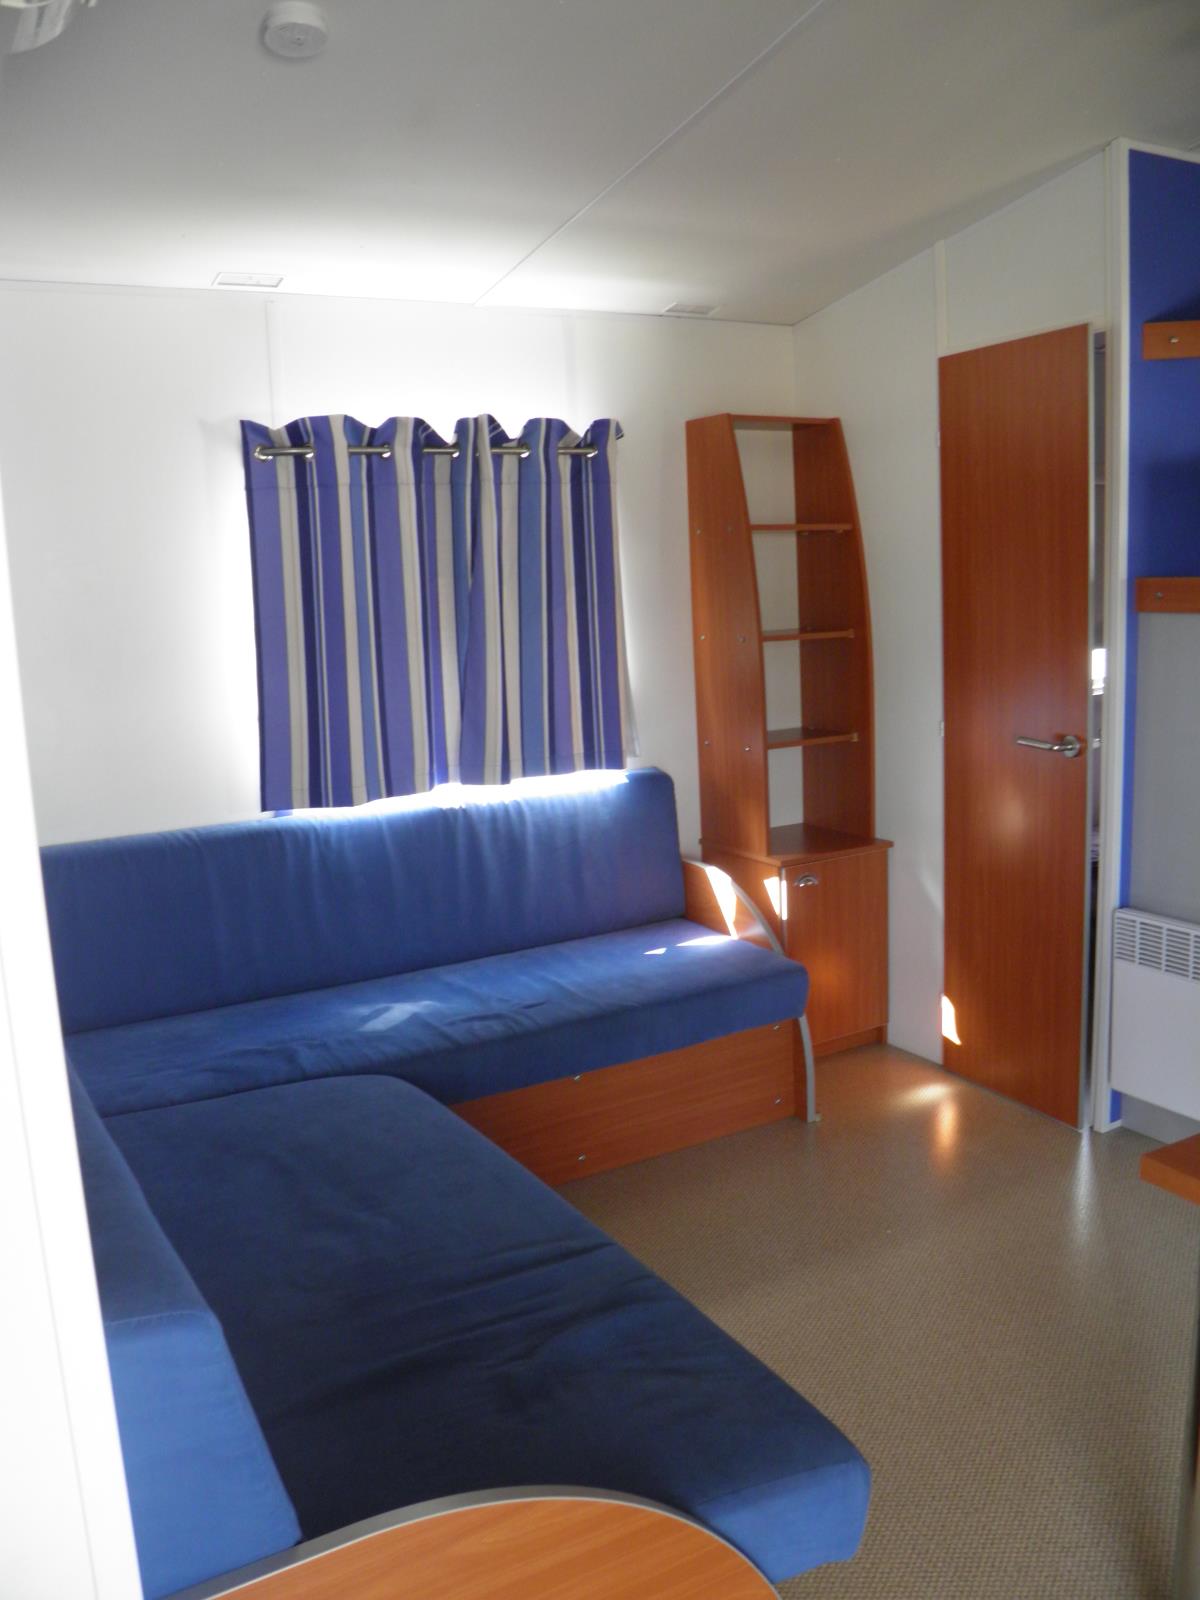 Huuraccommodatie - Ib Mobile Home Loft Rapidhome 30M² + Airconditioning 2 Kamers - Camping Le Sous-Bois Ardèche